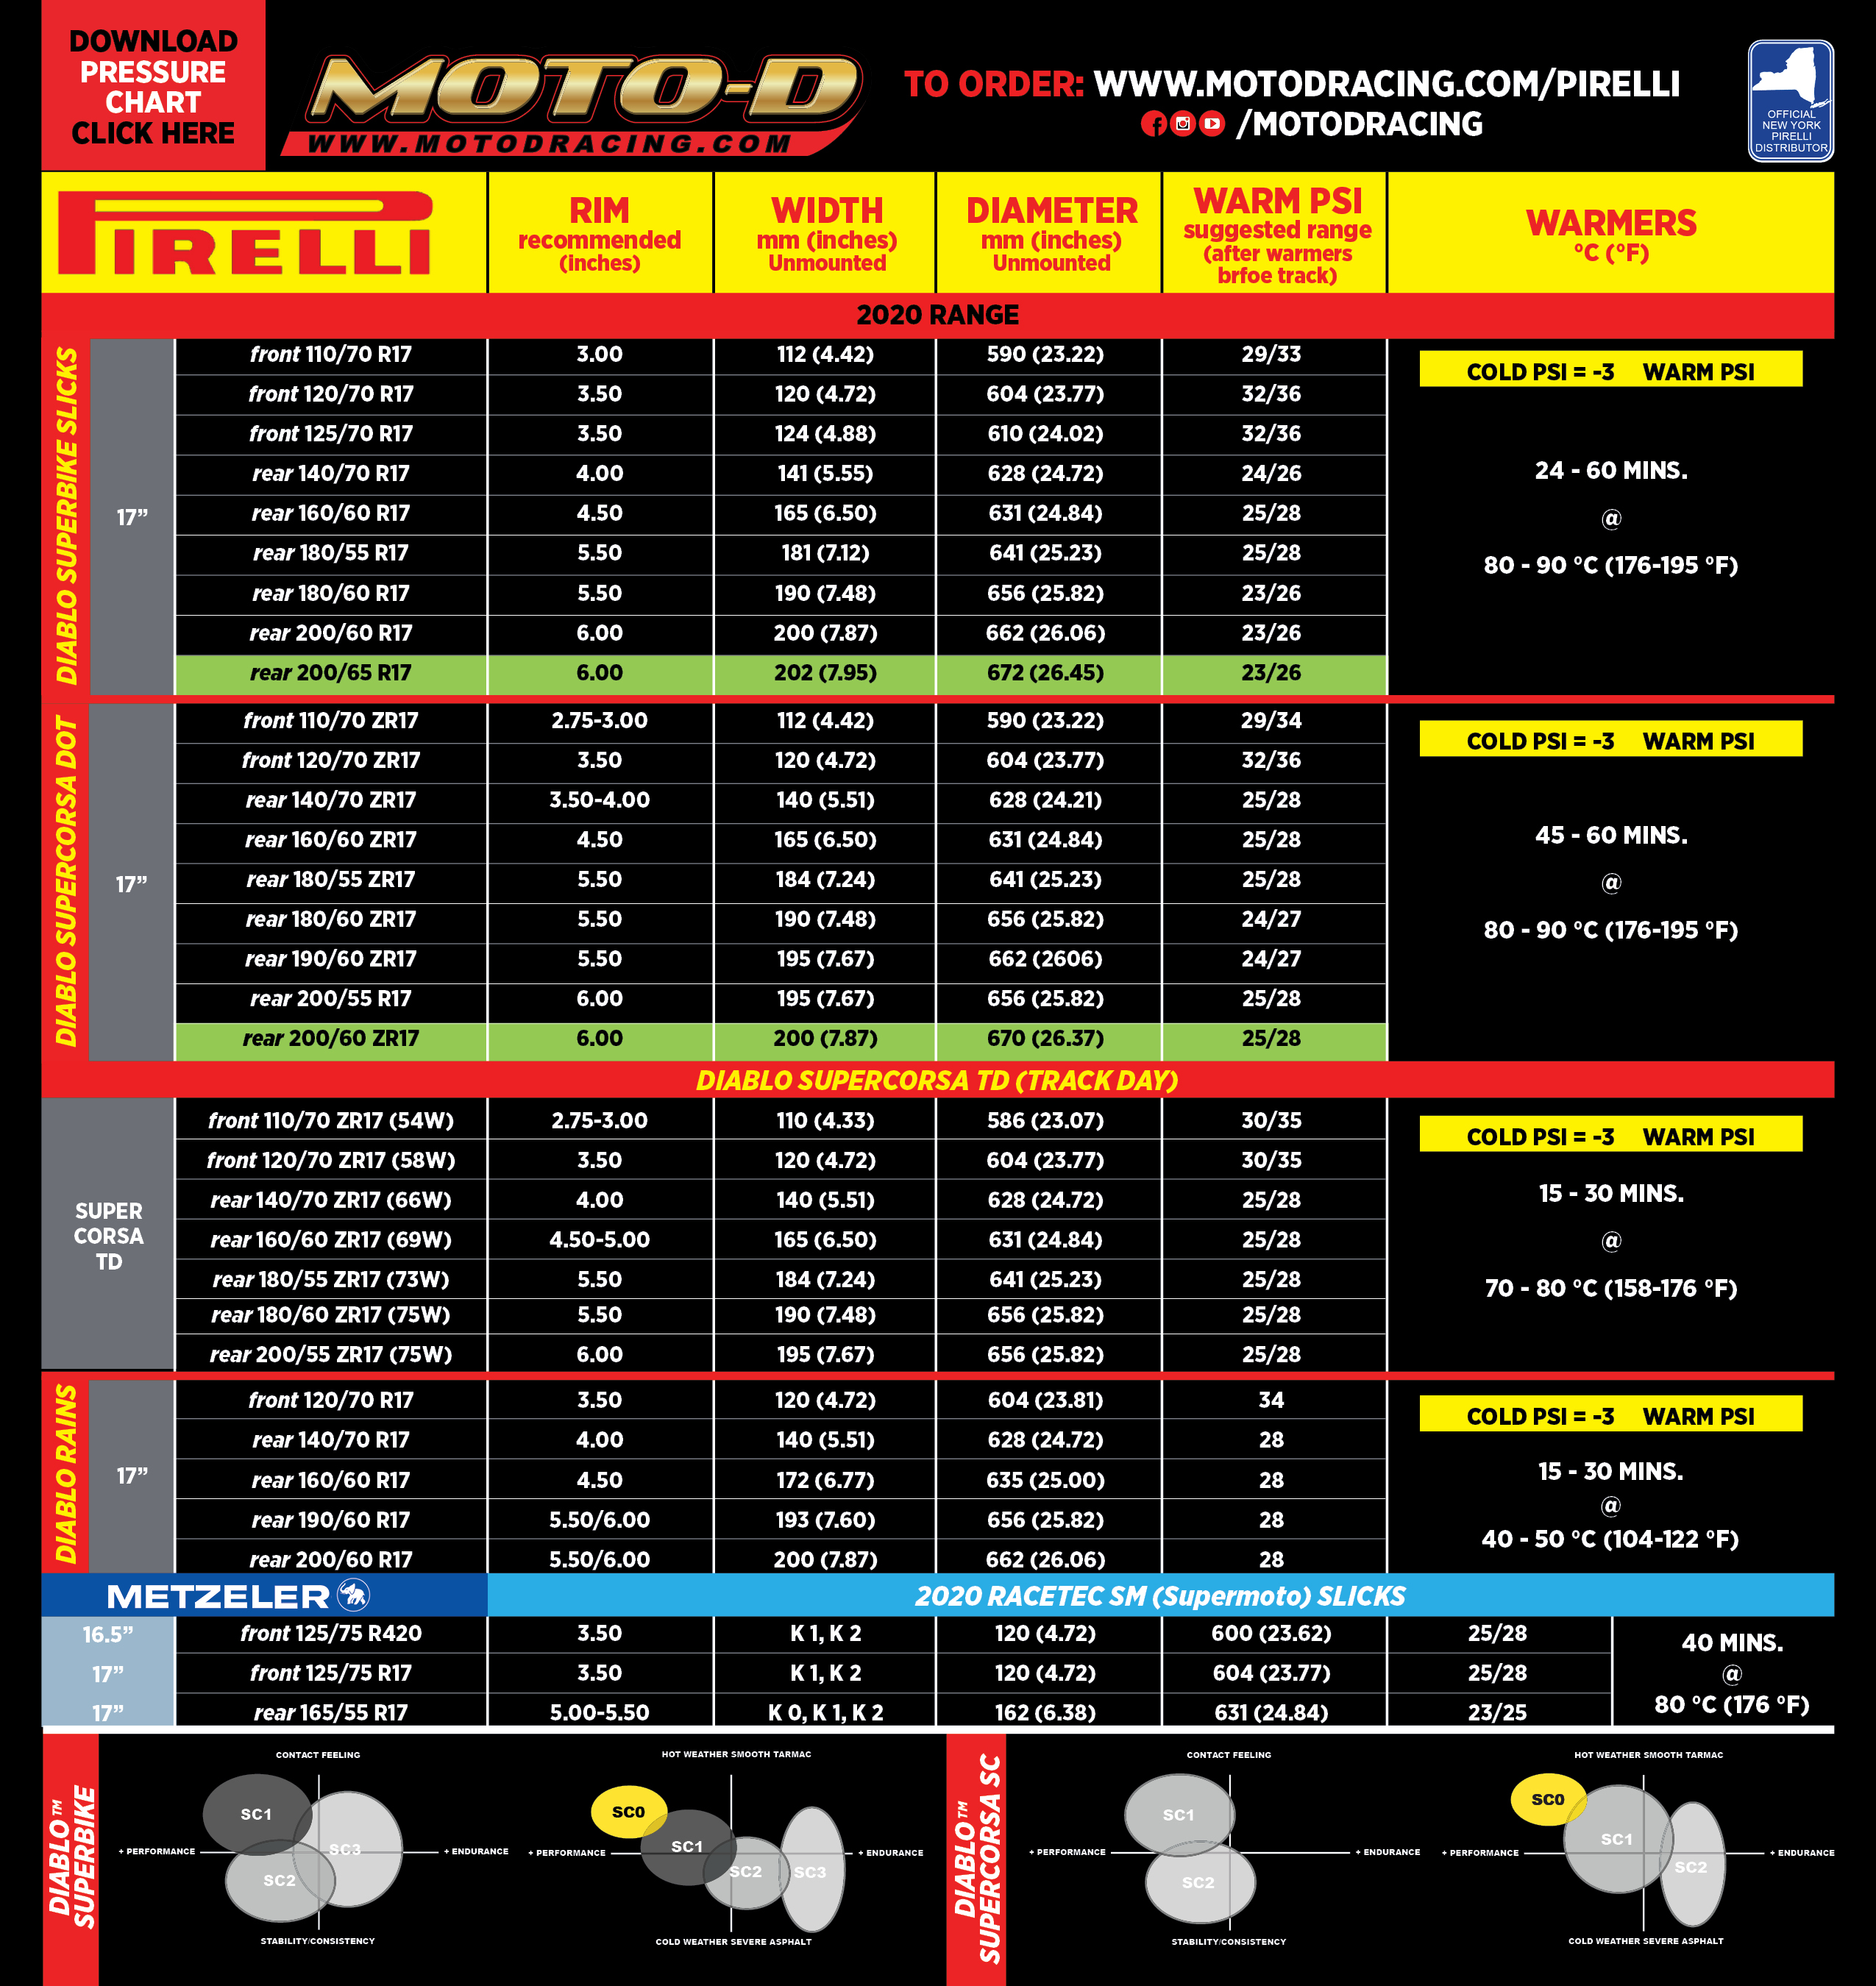 pirelli is the top rated motorcycle tire